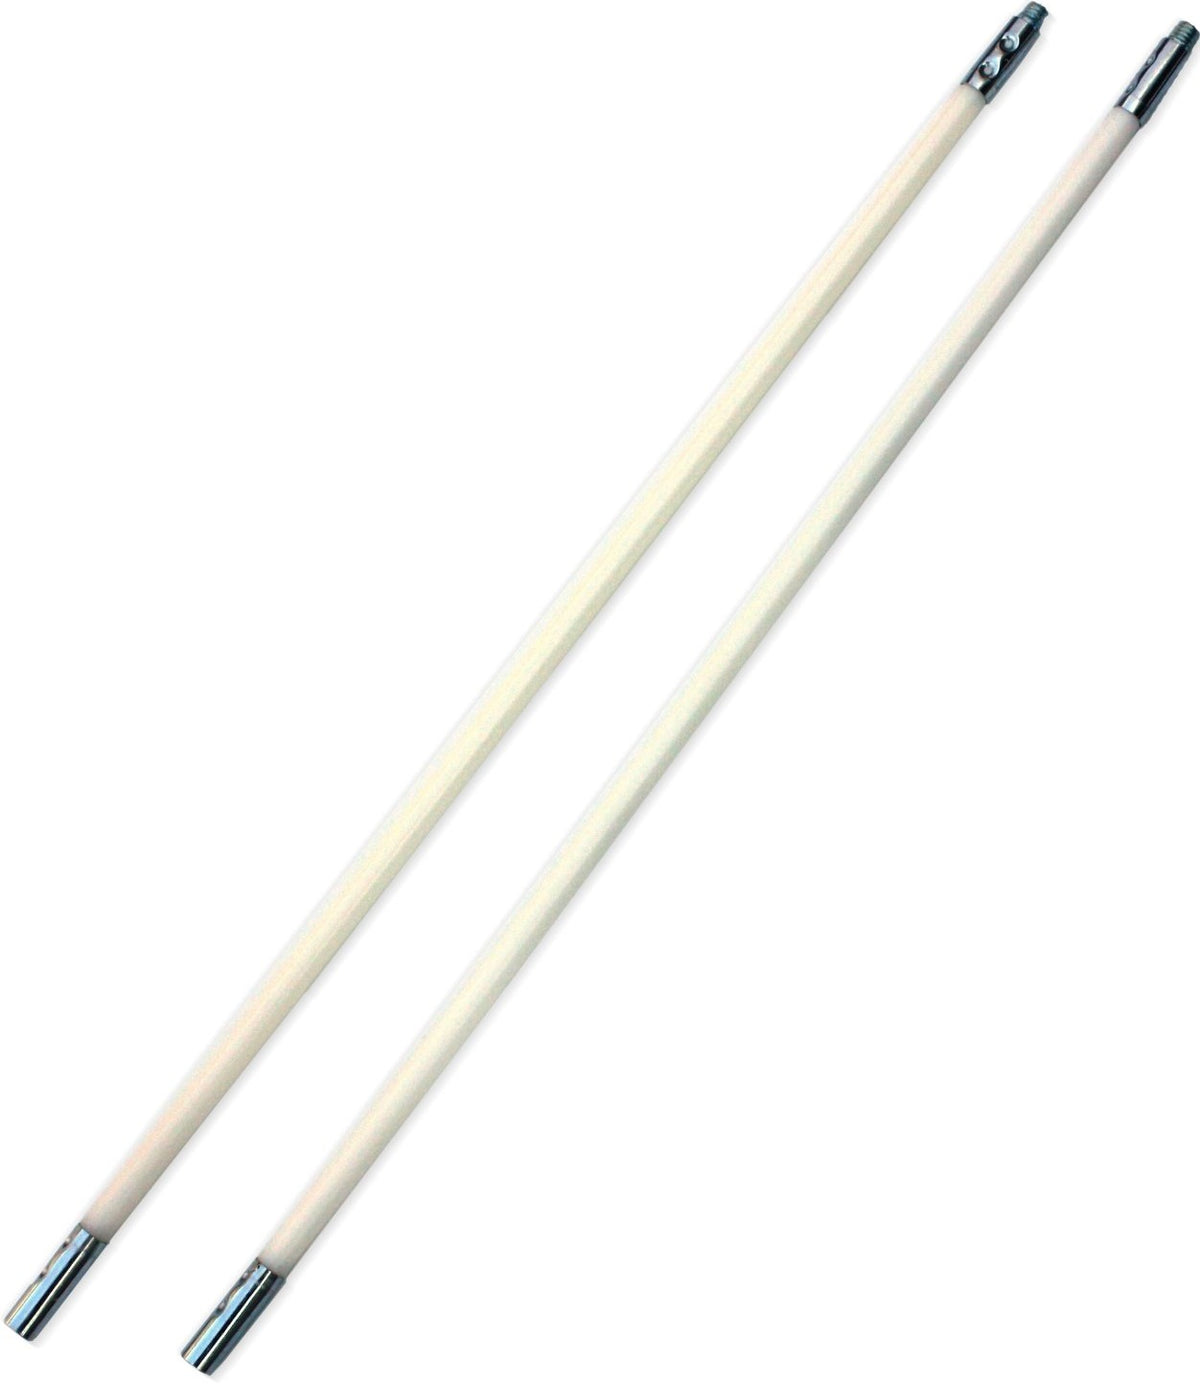 Gardus PRD308 SootEaterPellet Extension Rod, 3', Pack of 2